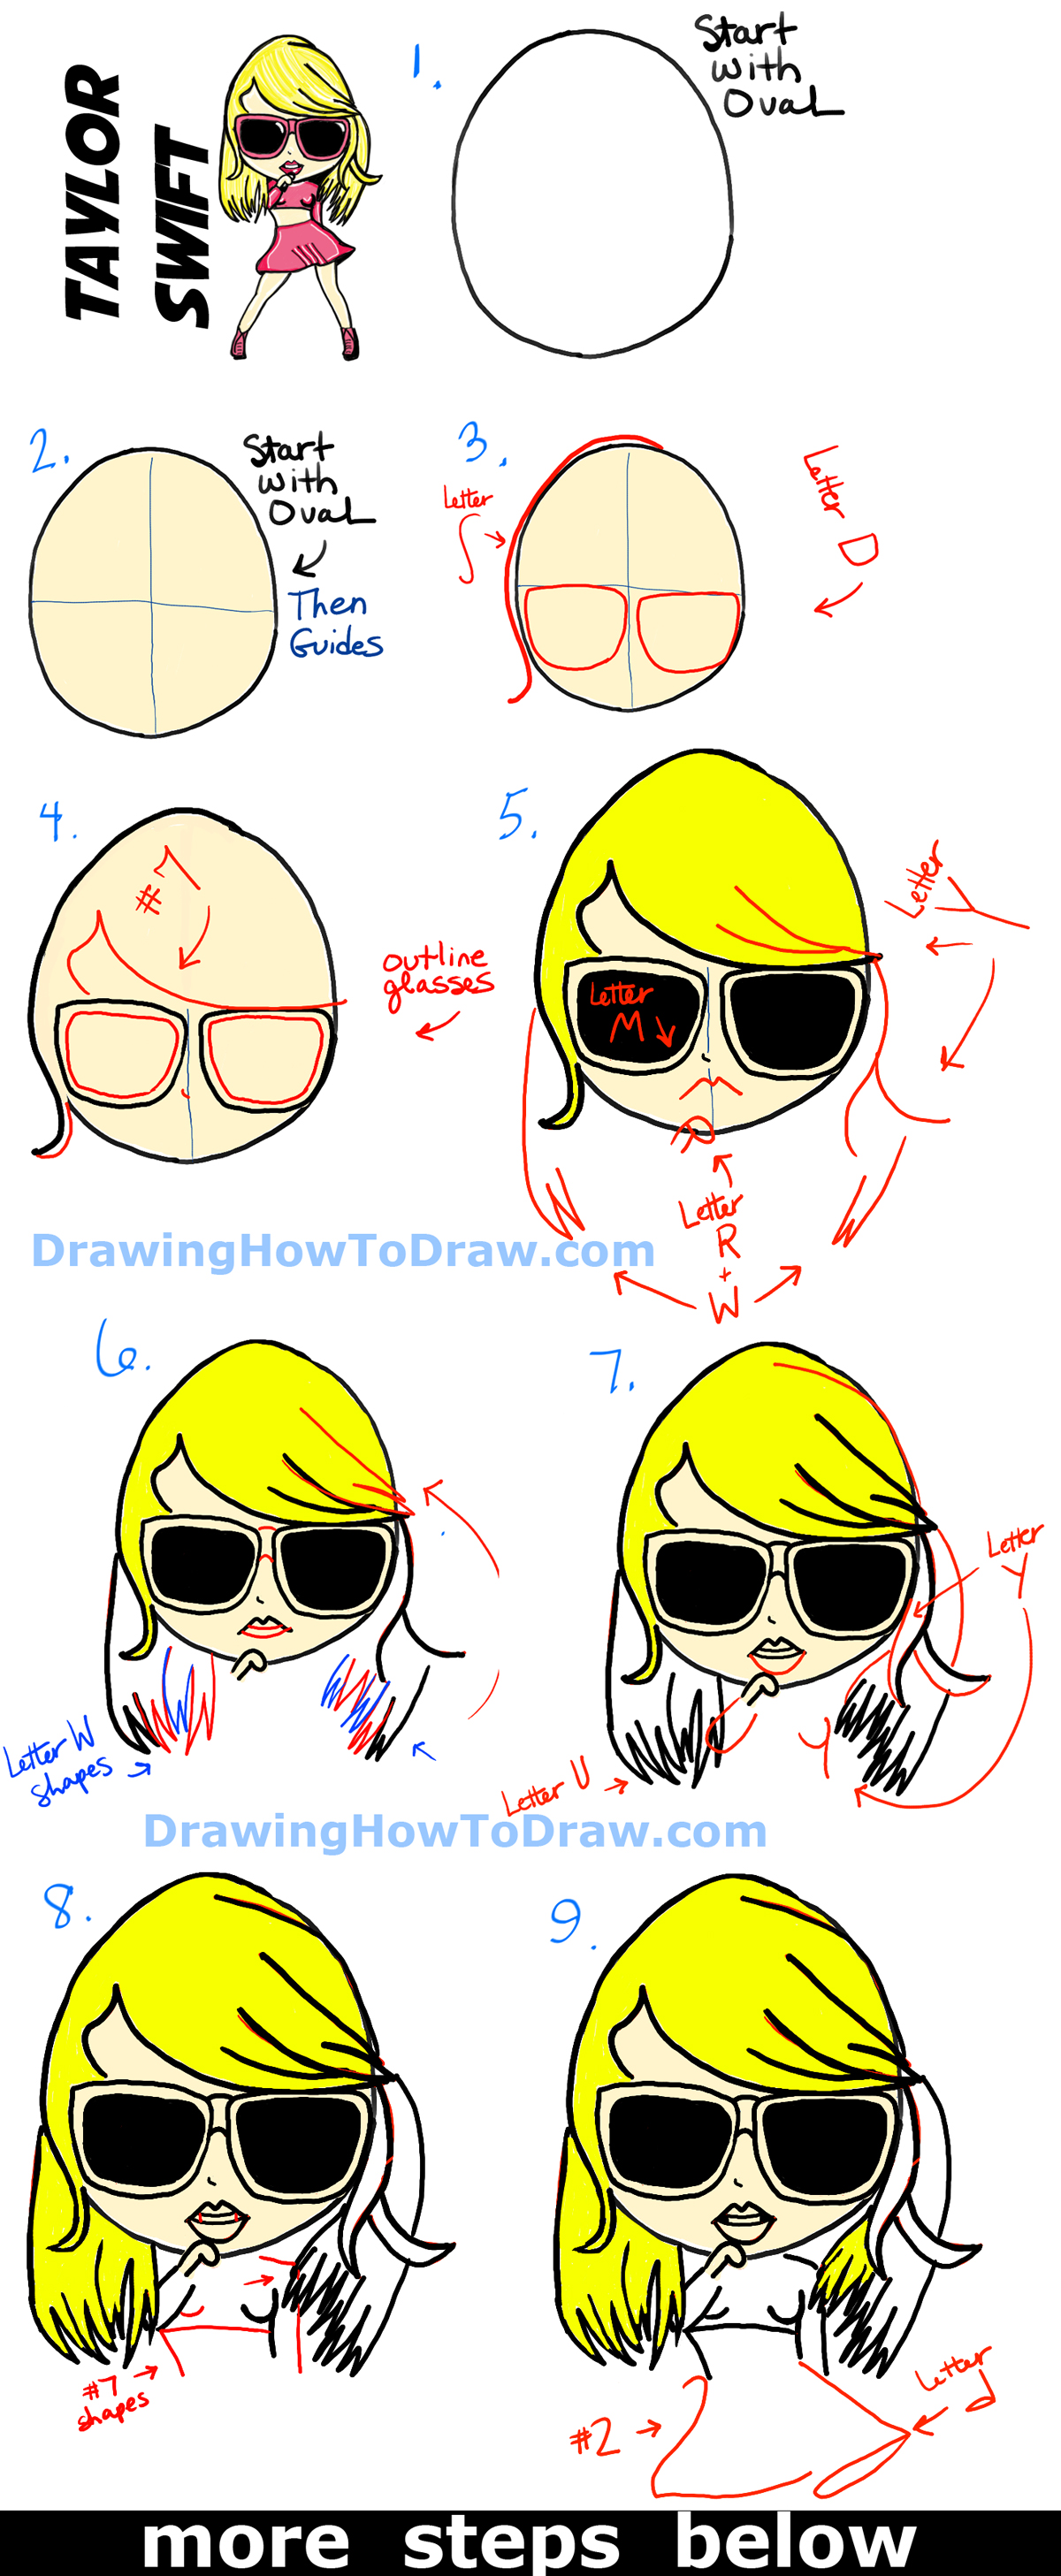 How to Draw Taylor Swift as Cute Cartoon Chibi Drawing Tutorial